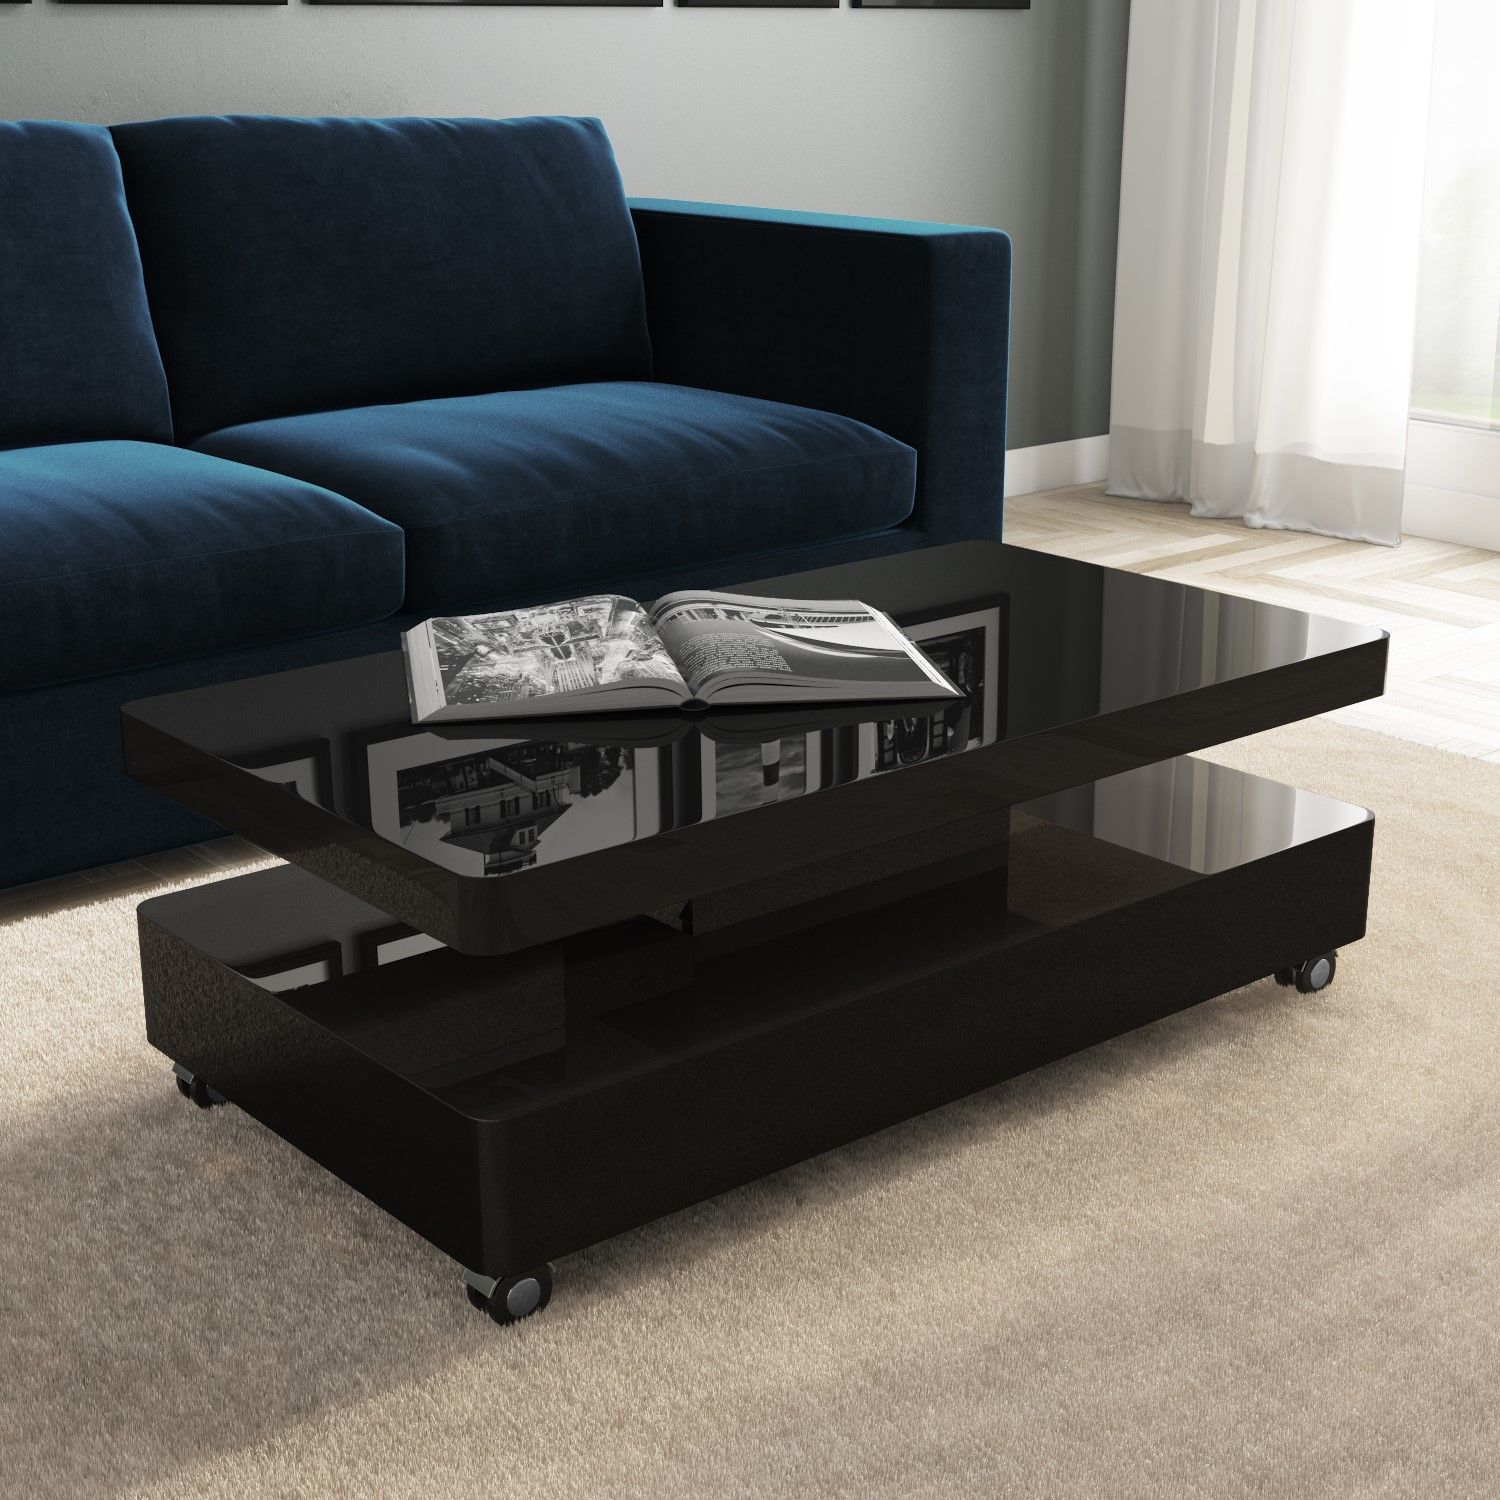 Large Rectangular Black Gloss Led Coffee Table – Tiffany – Furniture123 Within Rectangular Led Coffee Tables (Gallery 3 of 20)